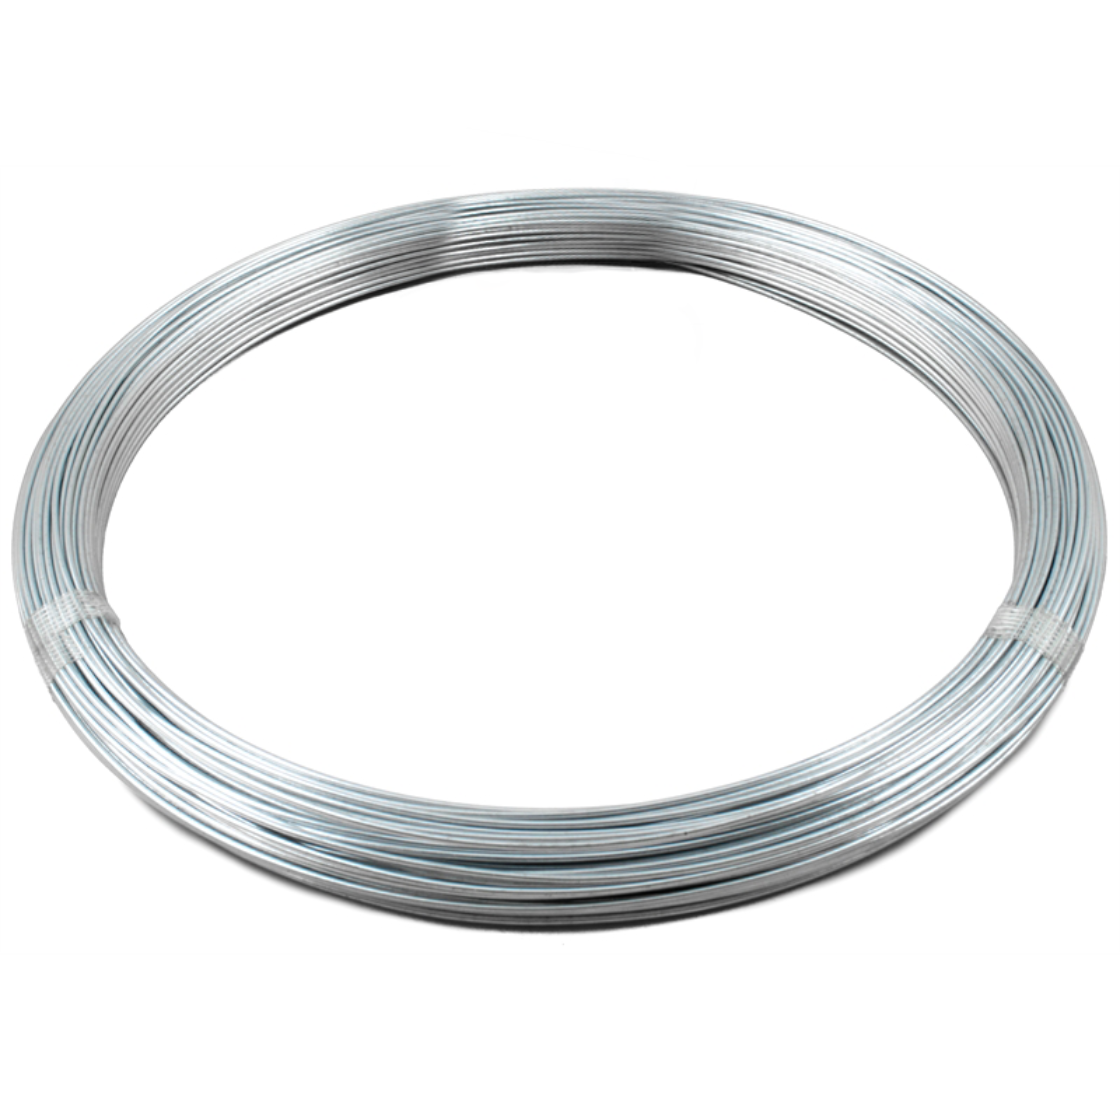 Stainless UK  Stainless steel tying wire